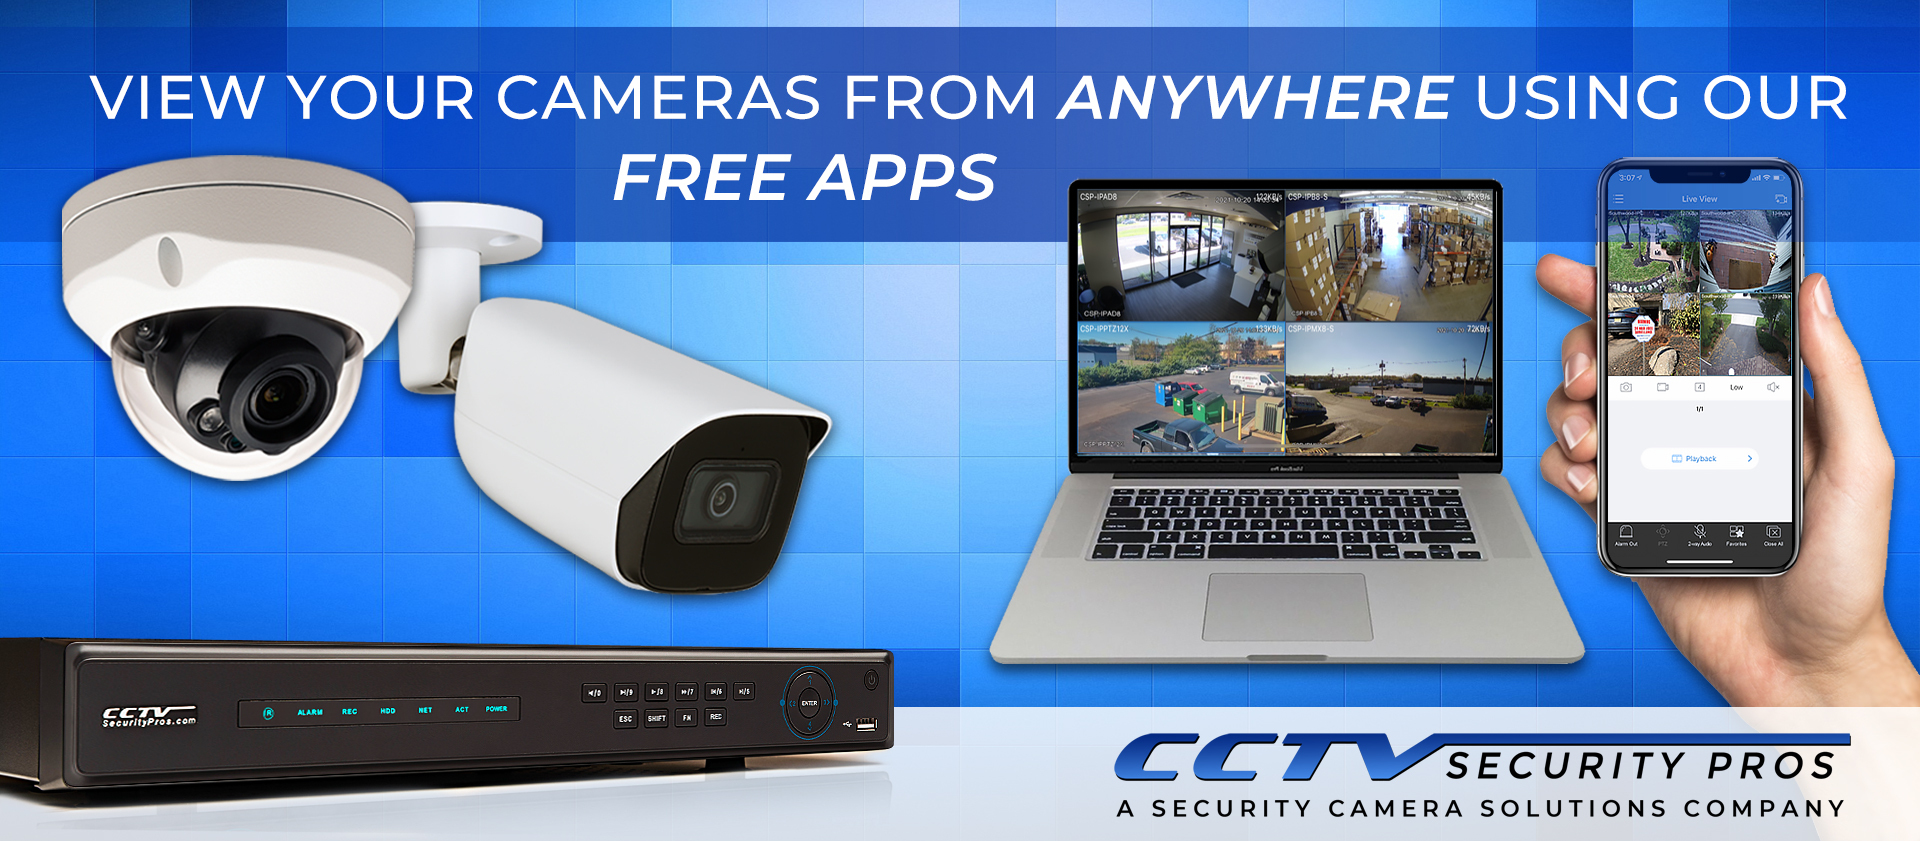 View Your Cameras From Anywhere using Our Free Apps